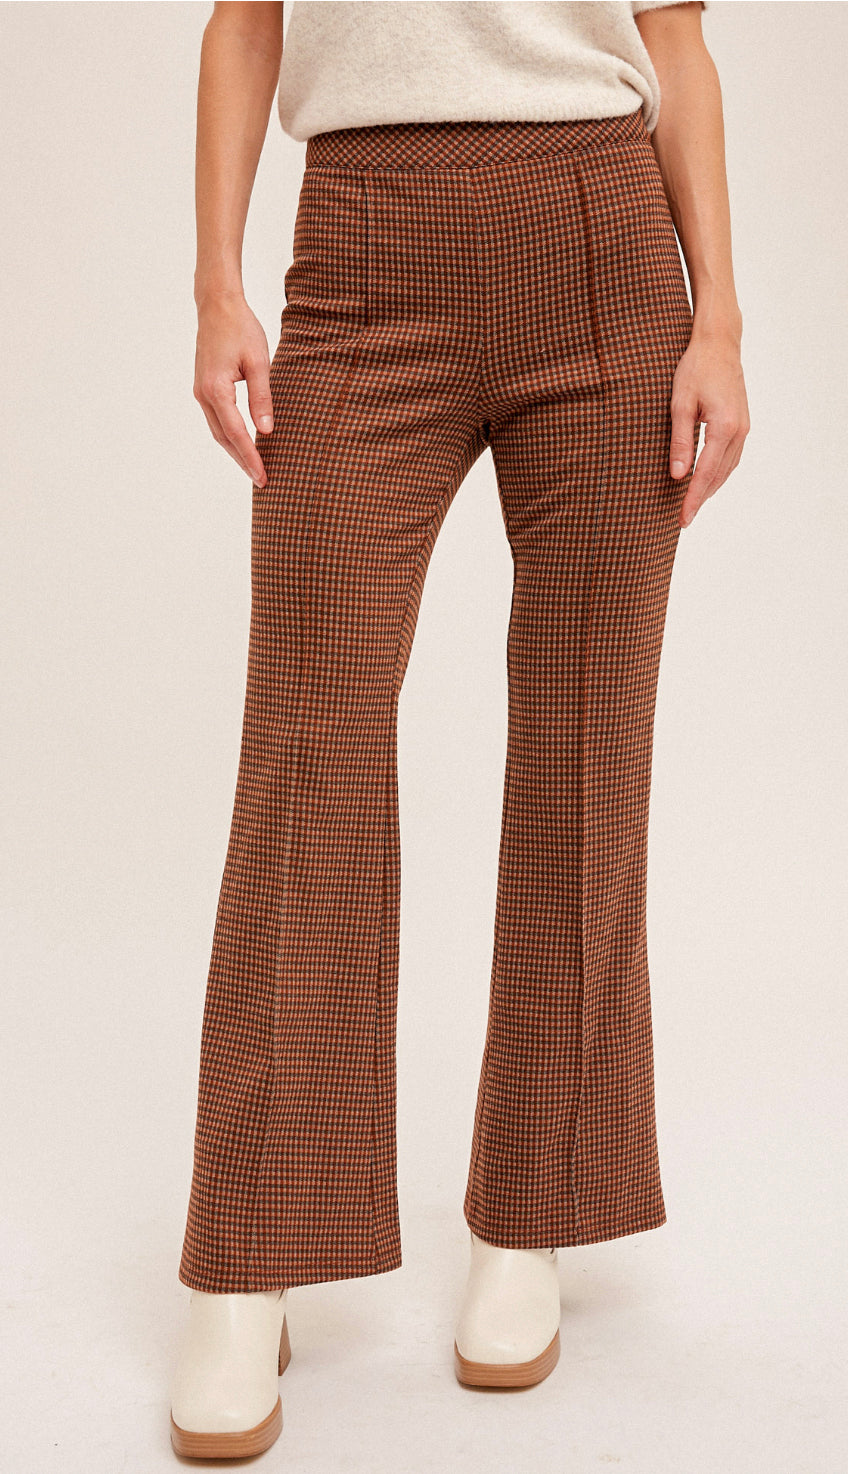 Bring It Back Check Flare Pants- Rust/Brown